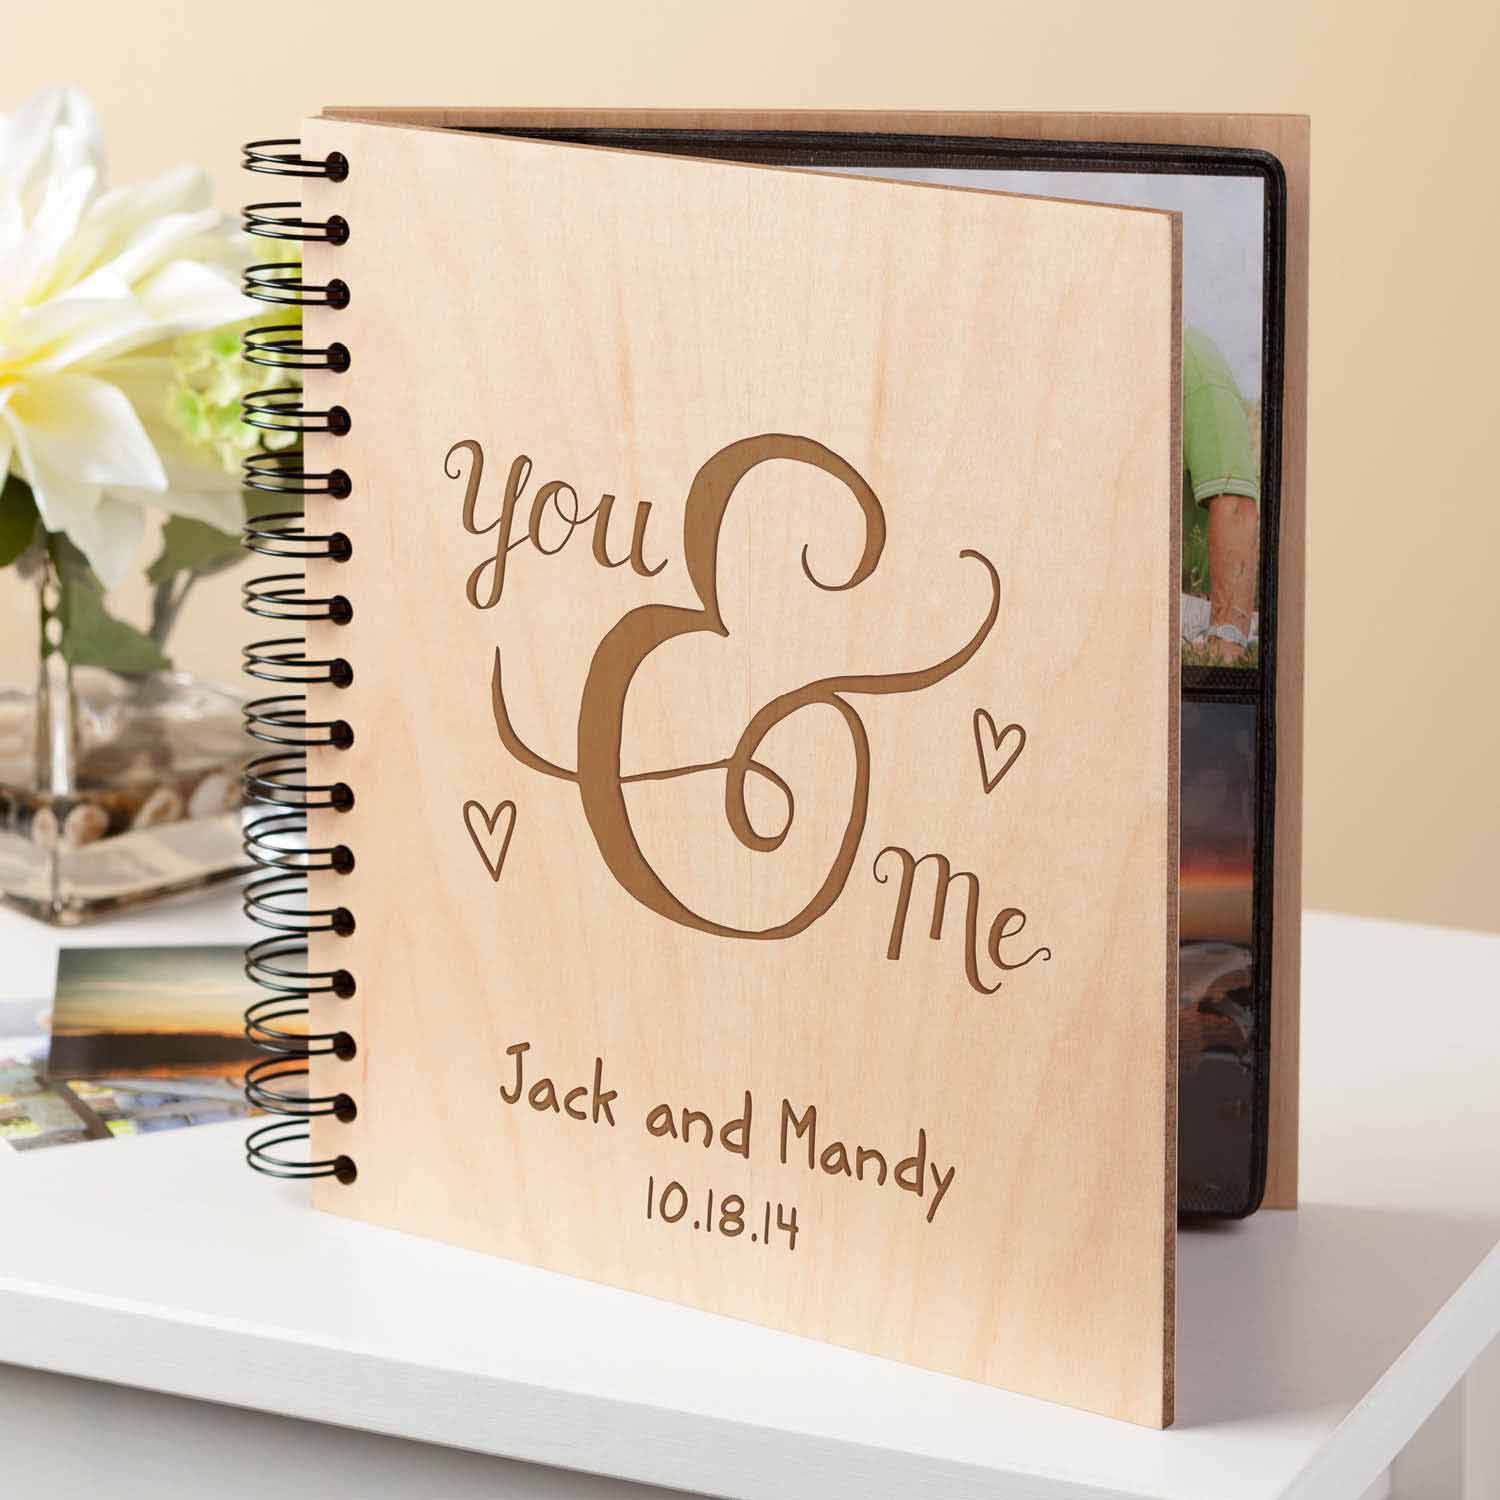 Personalized Photo Album - You and Me